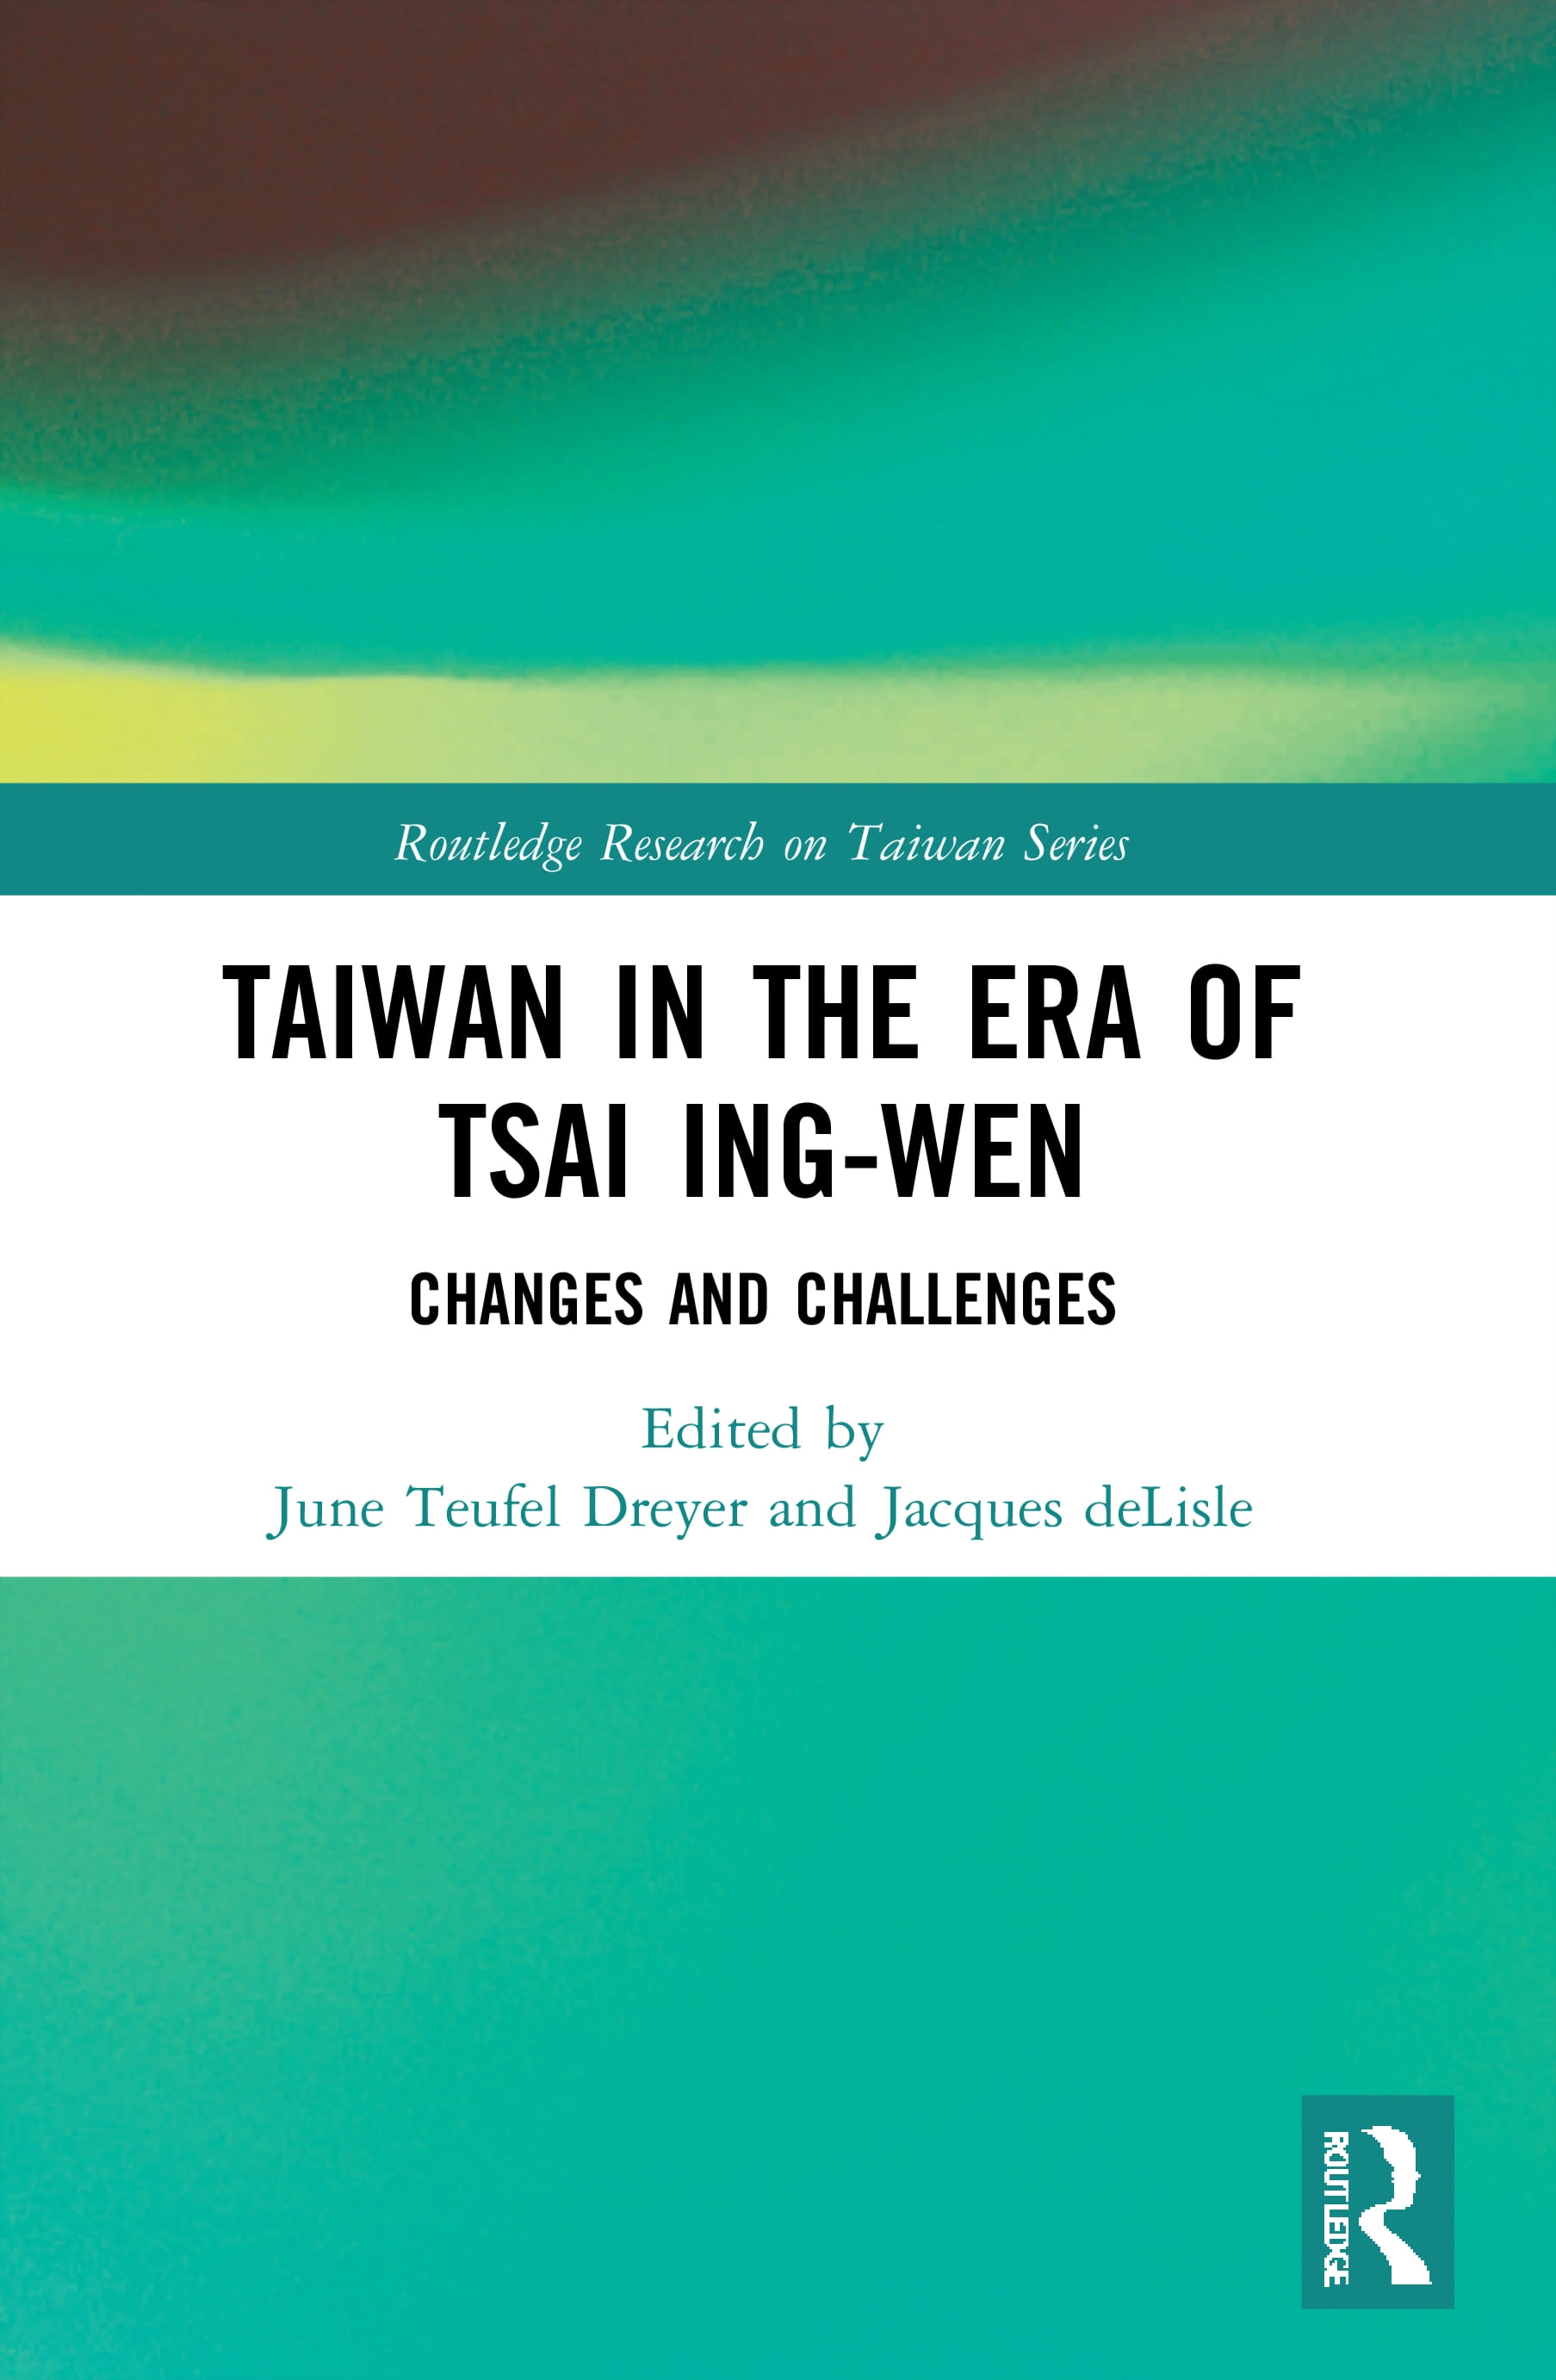 Taiwan in the Era of Tsai Ing-Wen: Changes and Challenges